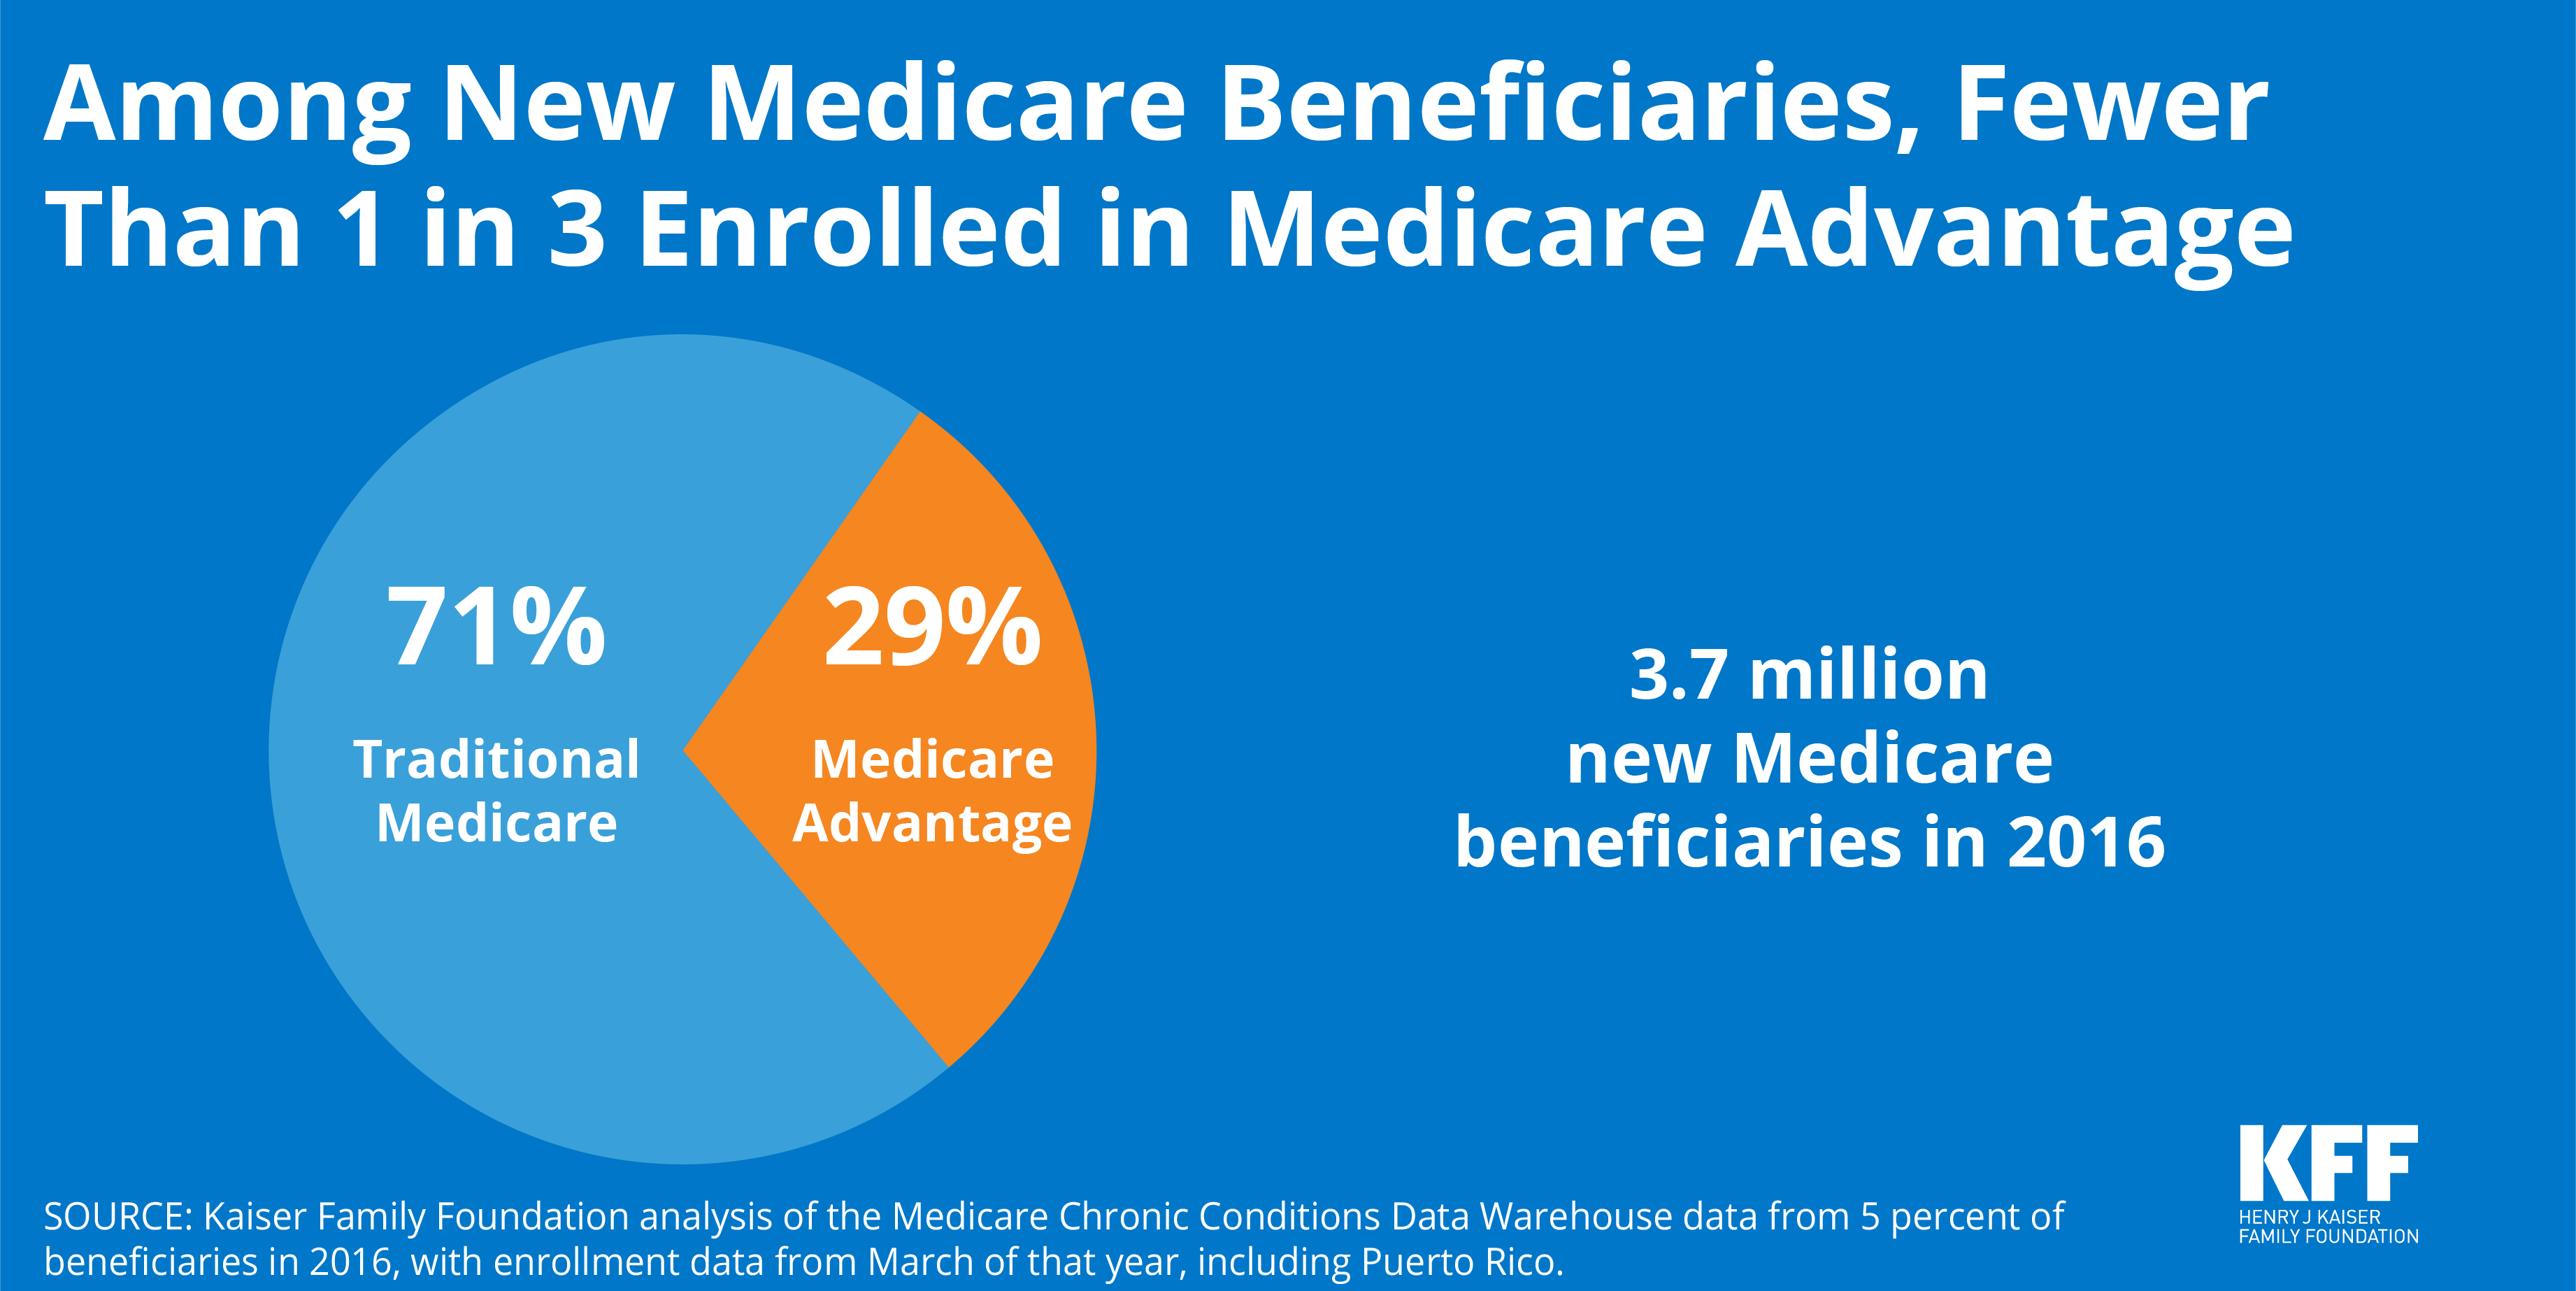 What Percent of New Medicare 